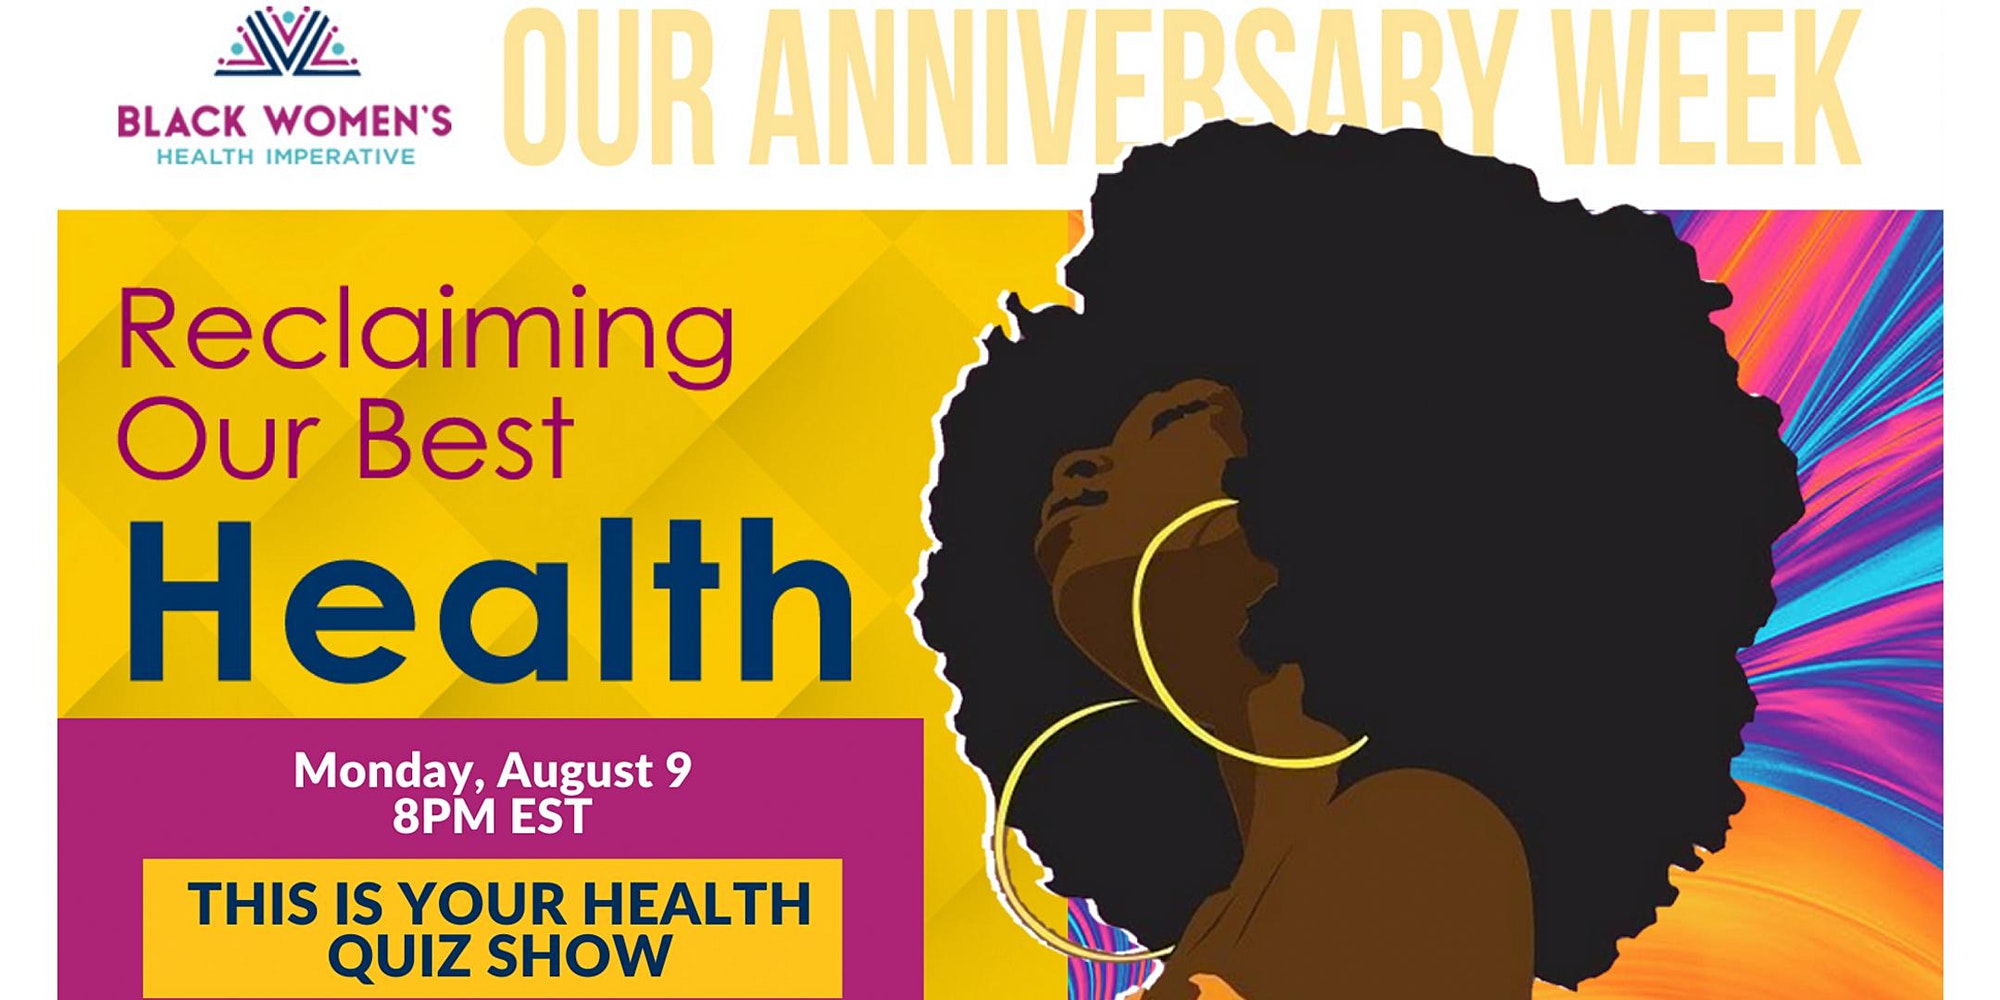 This is Your Health Game Show: BWHI Anniversary Week